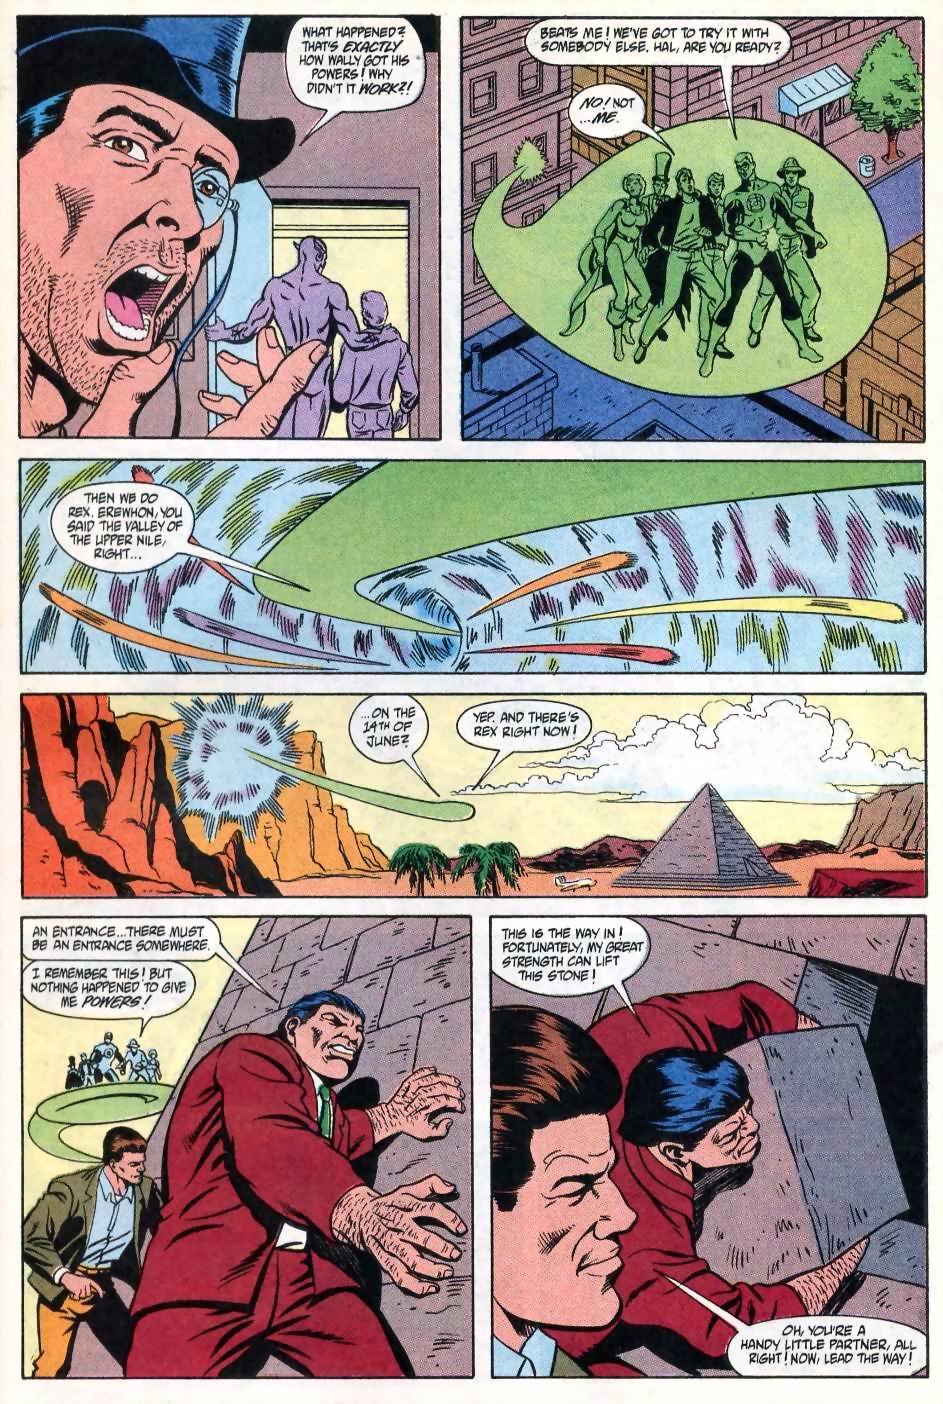 Justice League International (1993) 59 Page 20